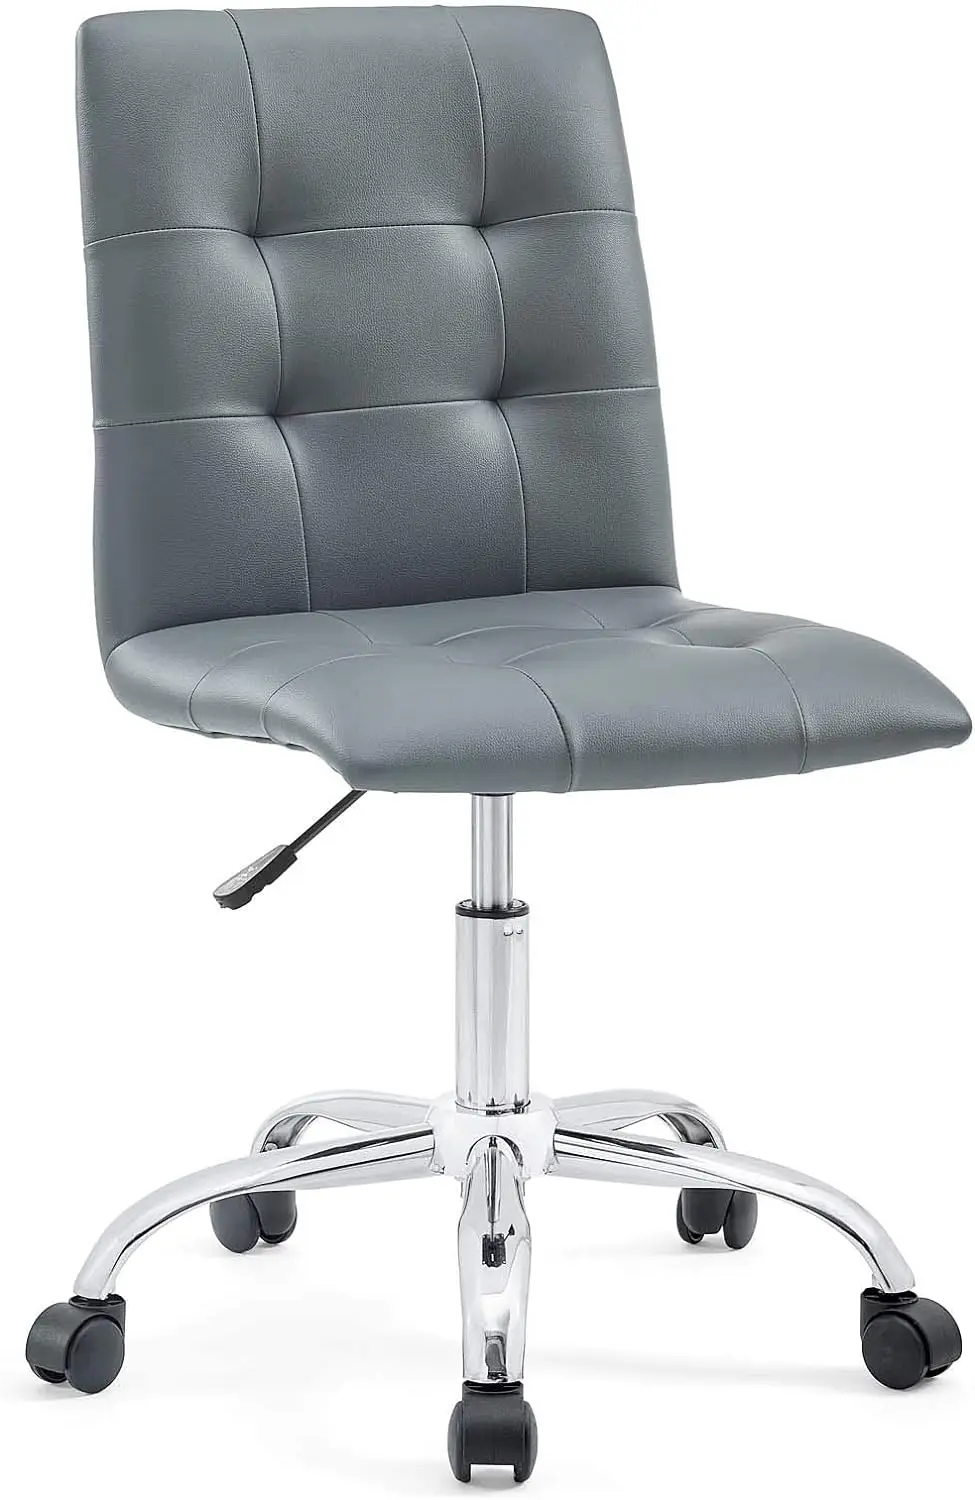 new-prim-ribbed-armless-mid-back-swivel-conference-office-chair-in-gray-free-shipping